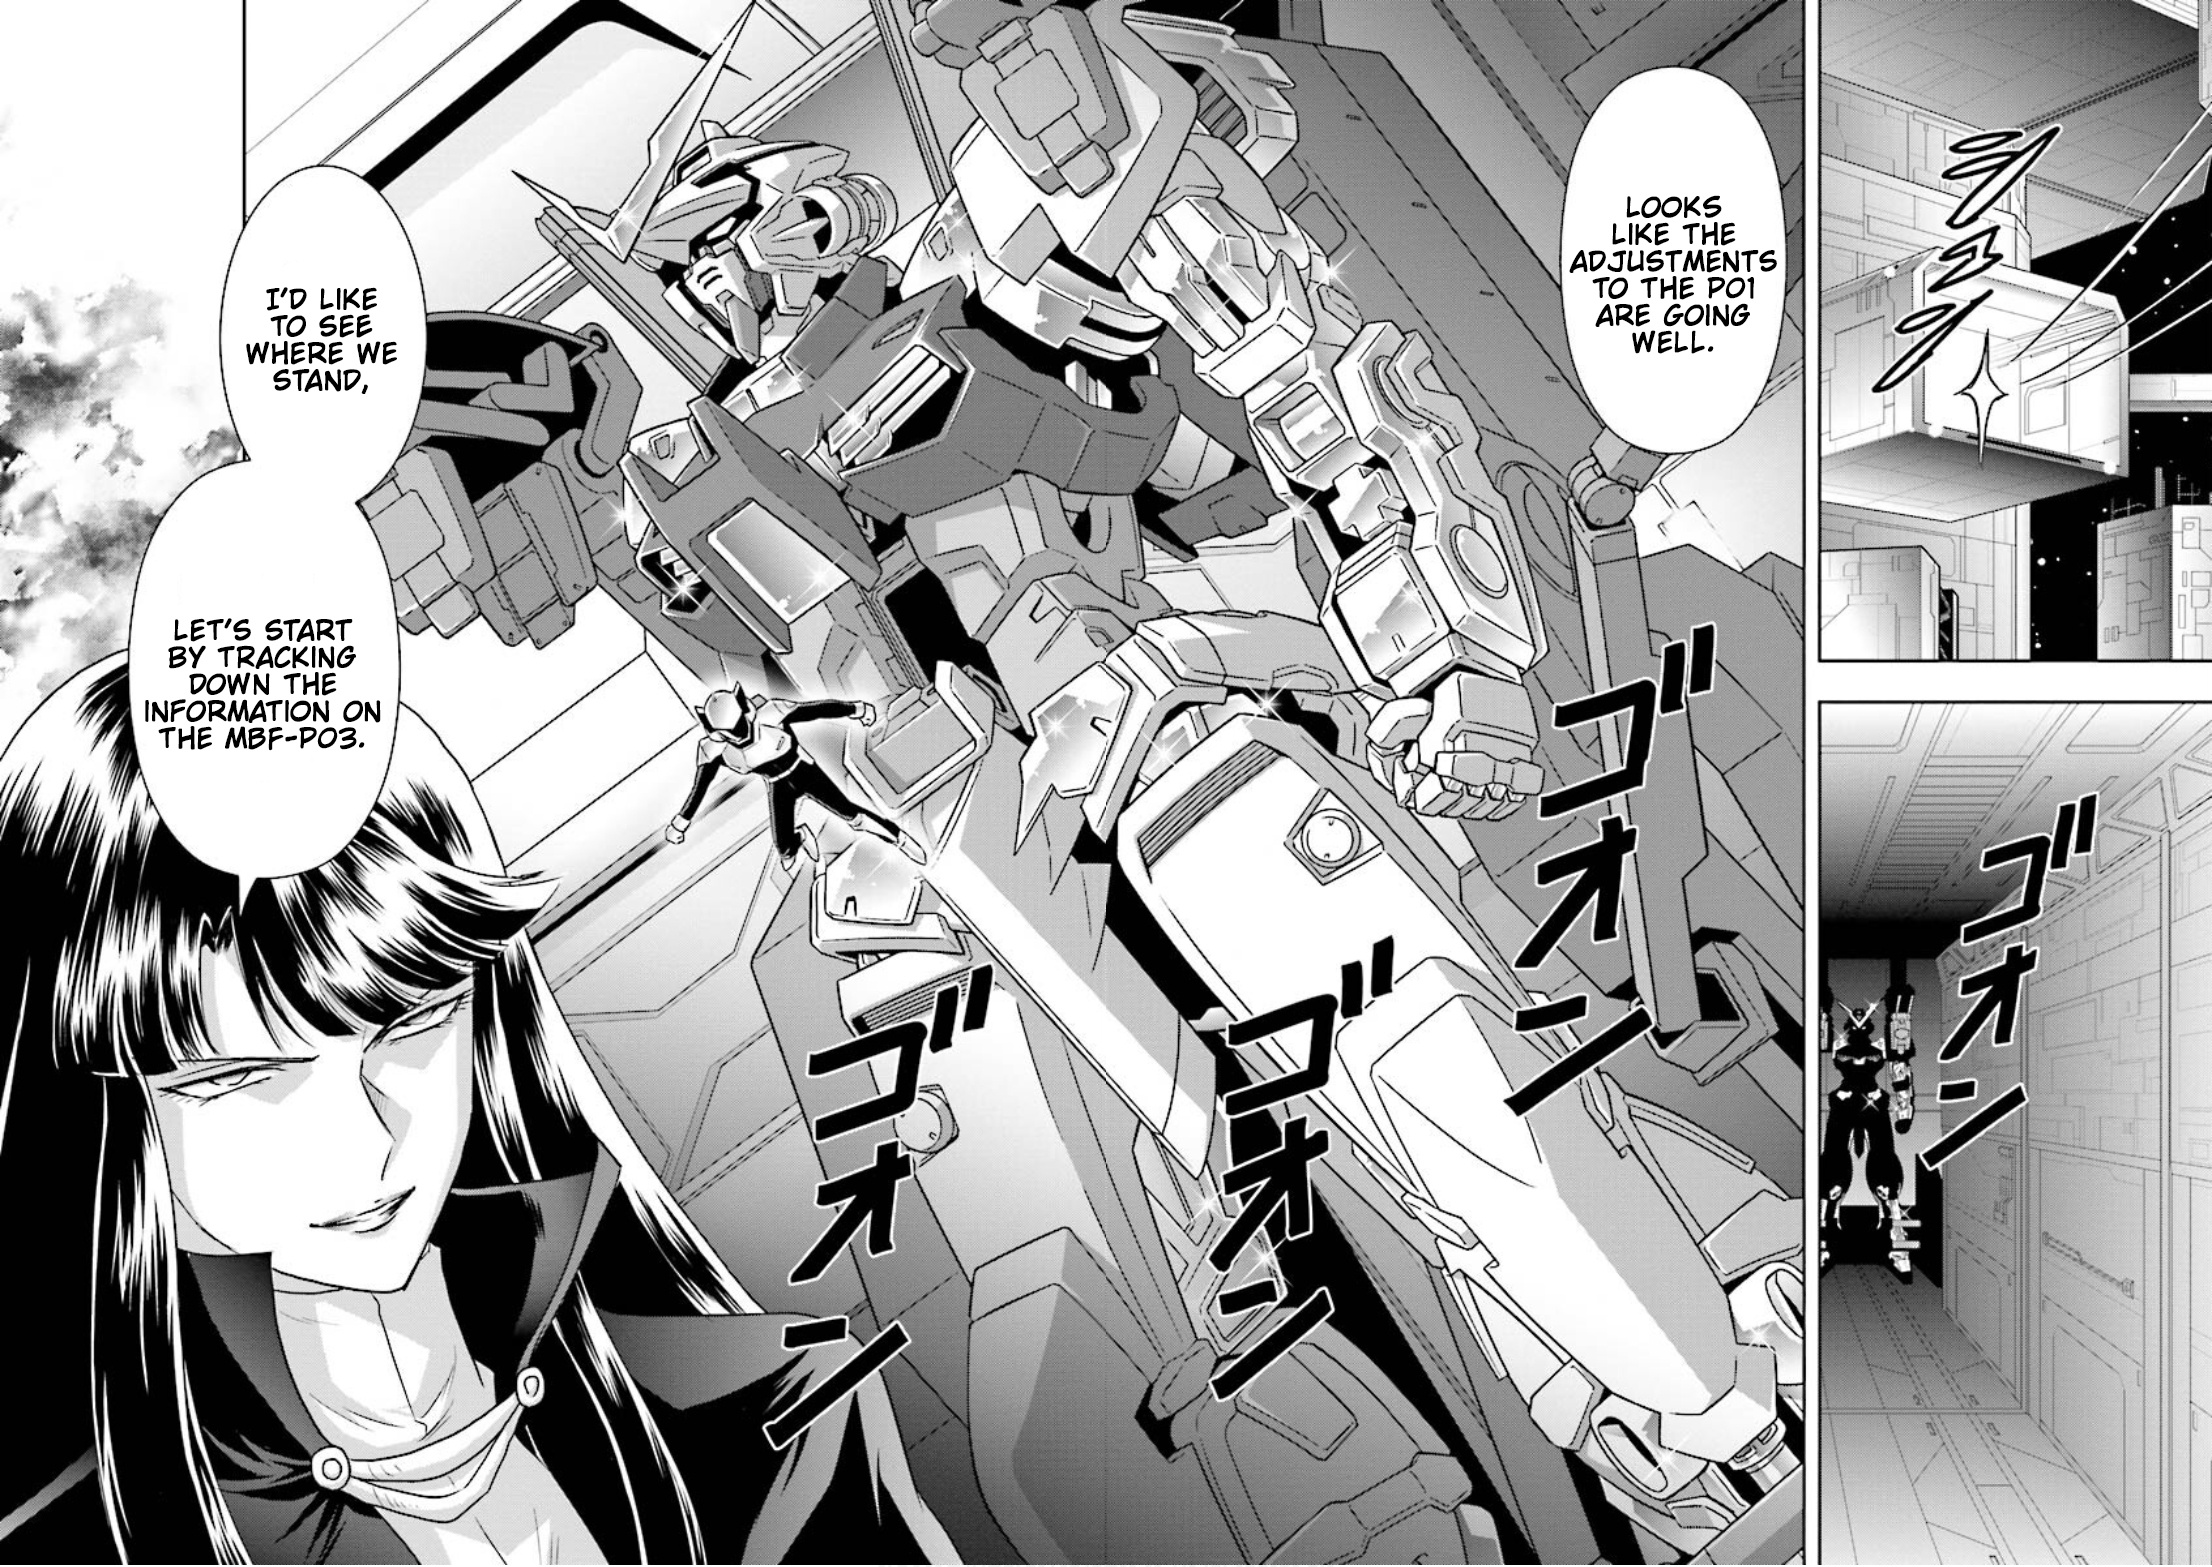 Mobile Suit Gundam Seed Astray Re:master Edition Vol.1 Chapter 5.5: Re:master Parts 1: Castle Of Ambition - Picture 2